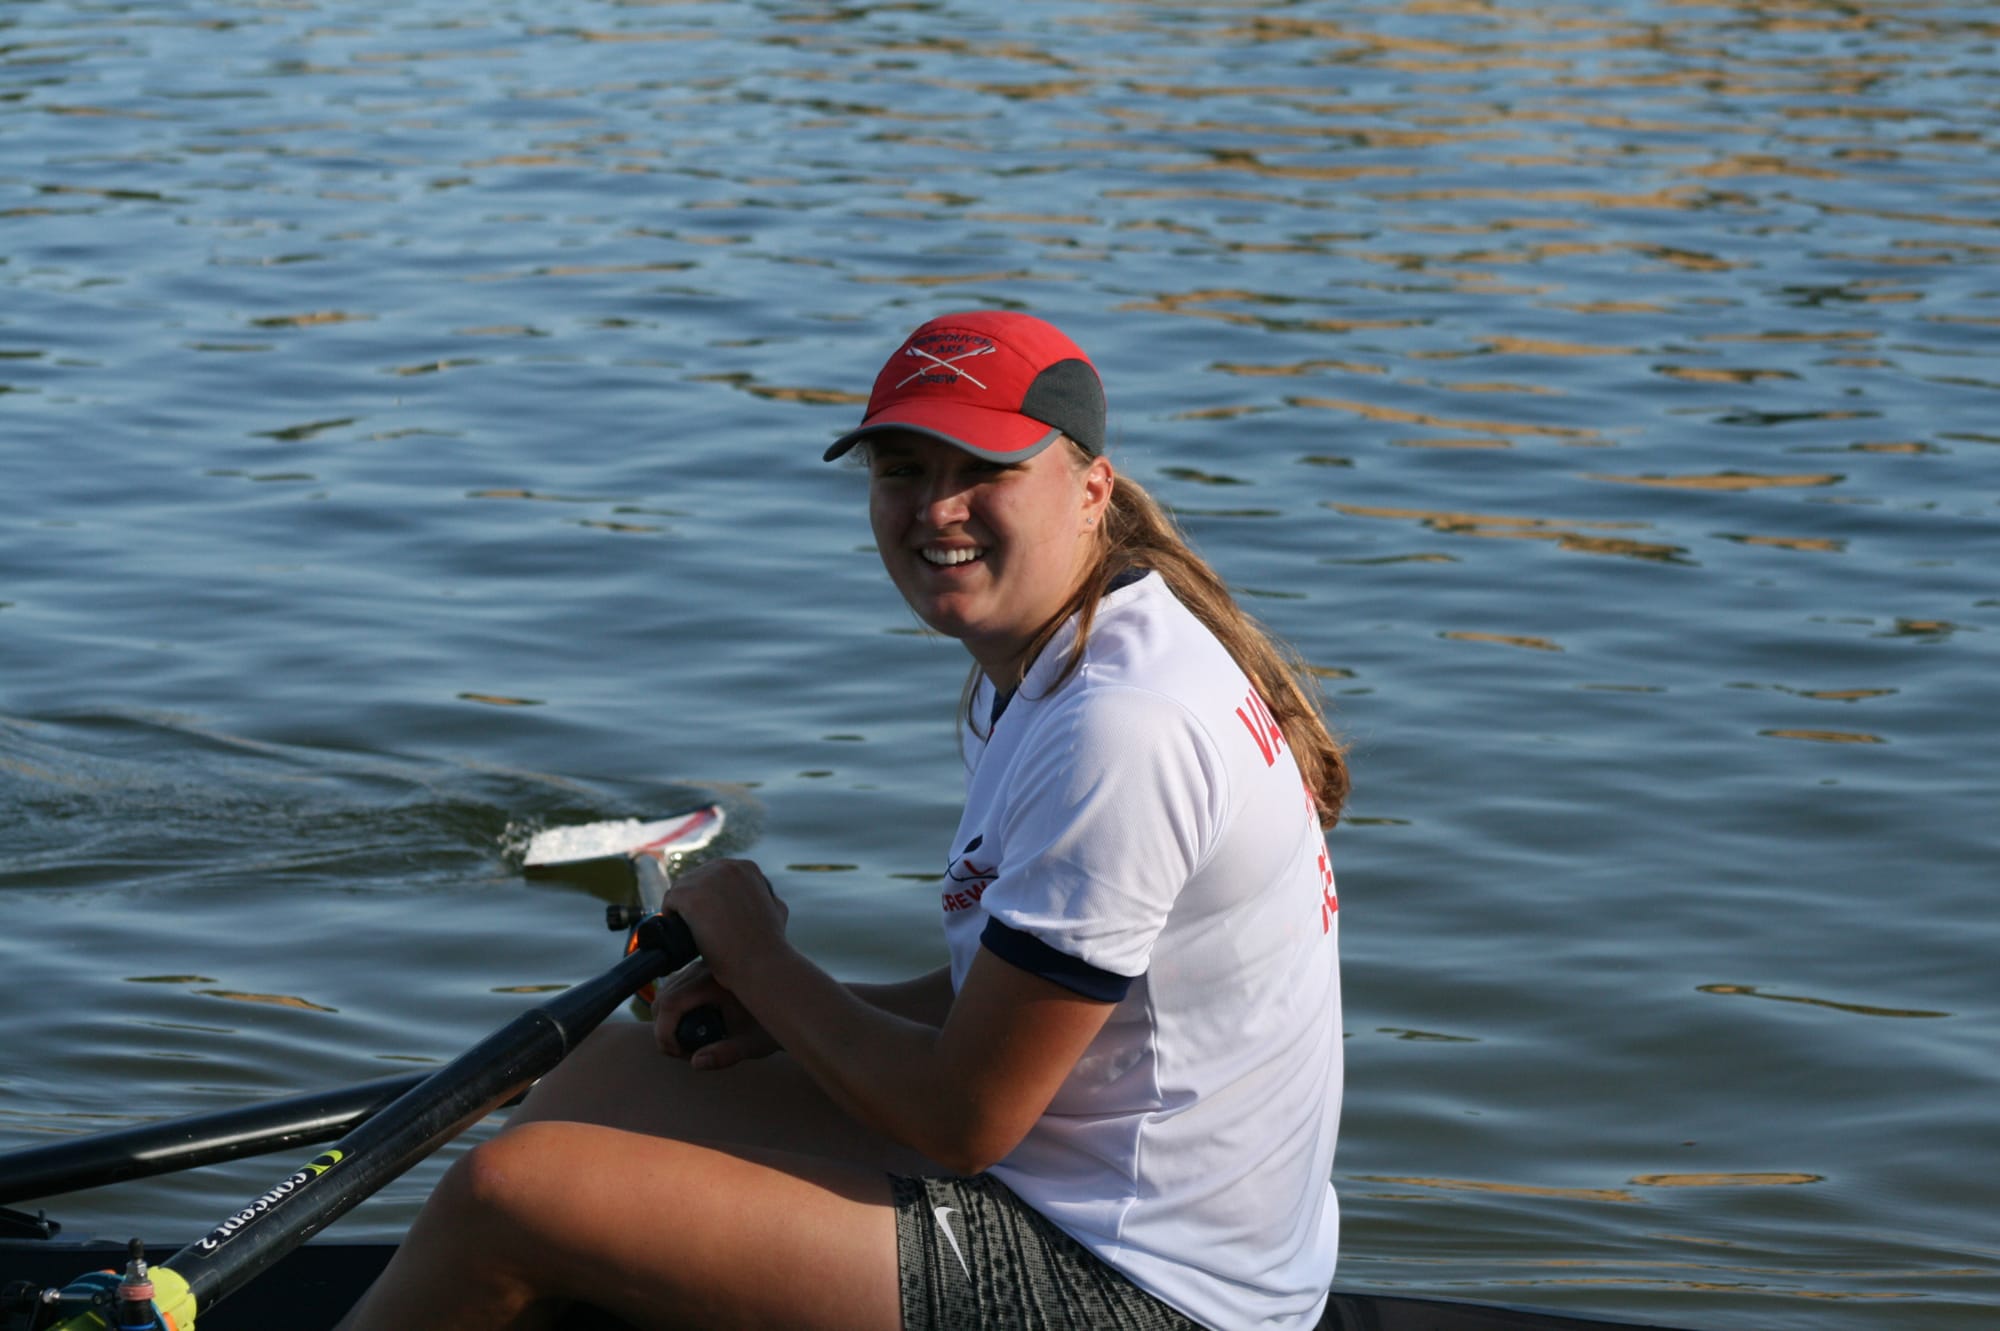 Gabi White of Vancouver Lake Crew finished 11th in the women's single scull competition at the U.S. Rowing Youth National Championships.